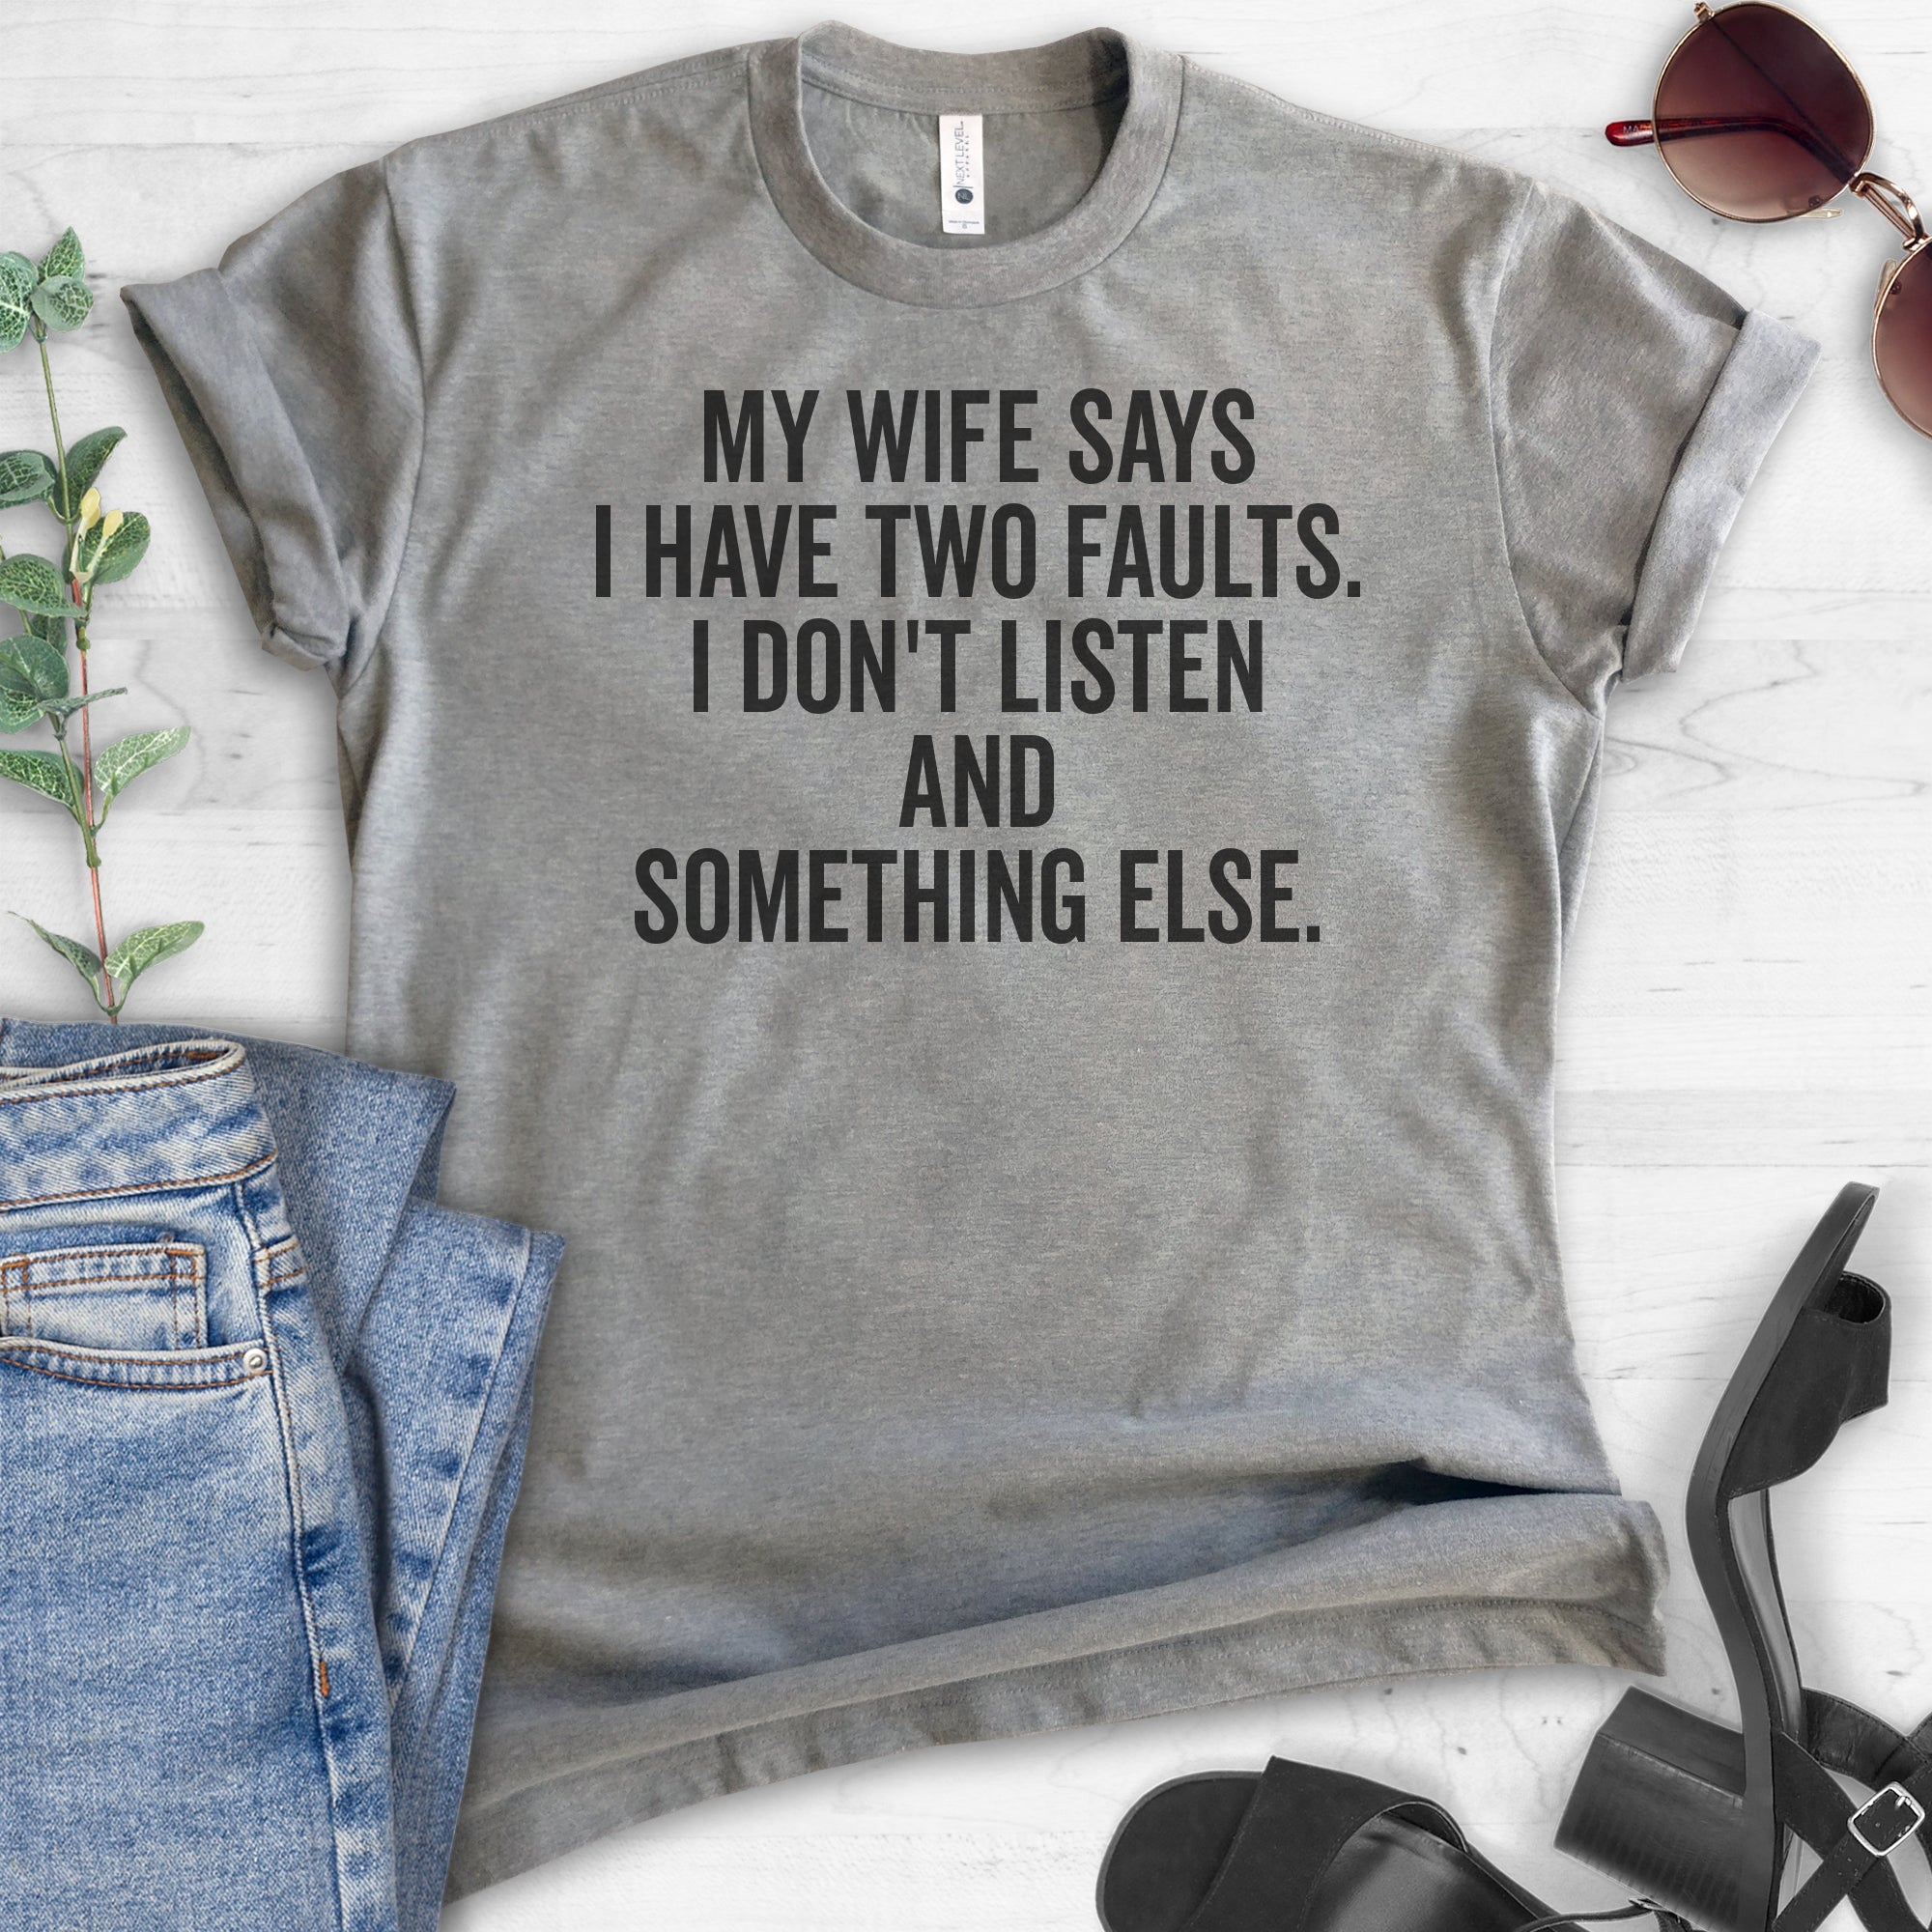 My Wife Says I Have Two Faults. I Don't Listen And Something Else. T-shirt